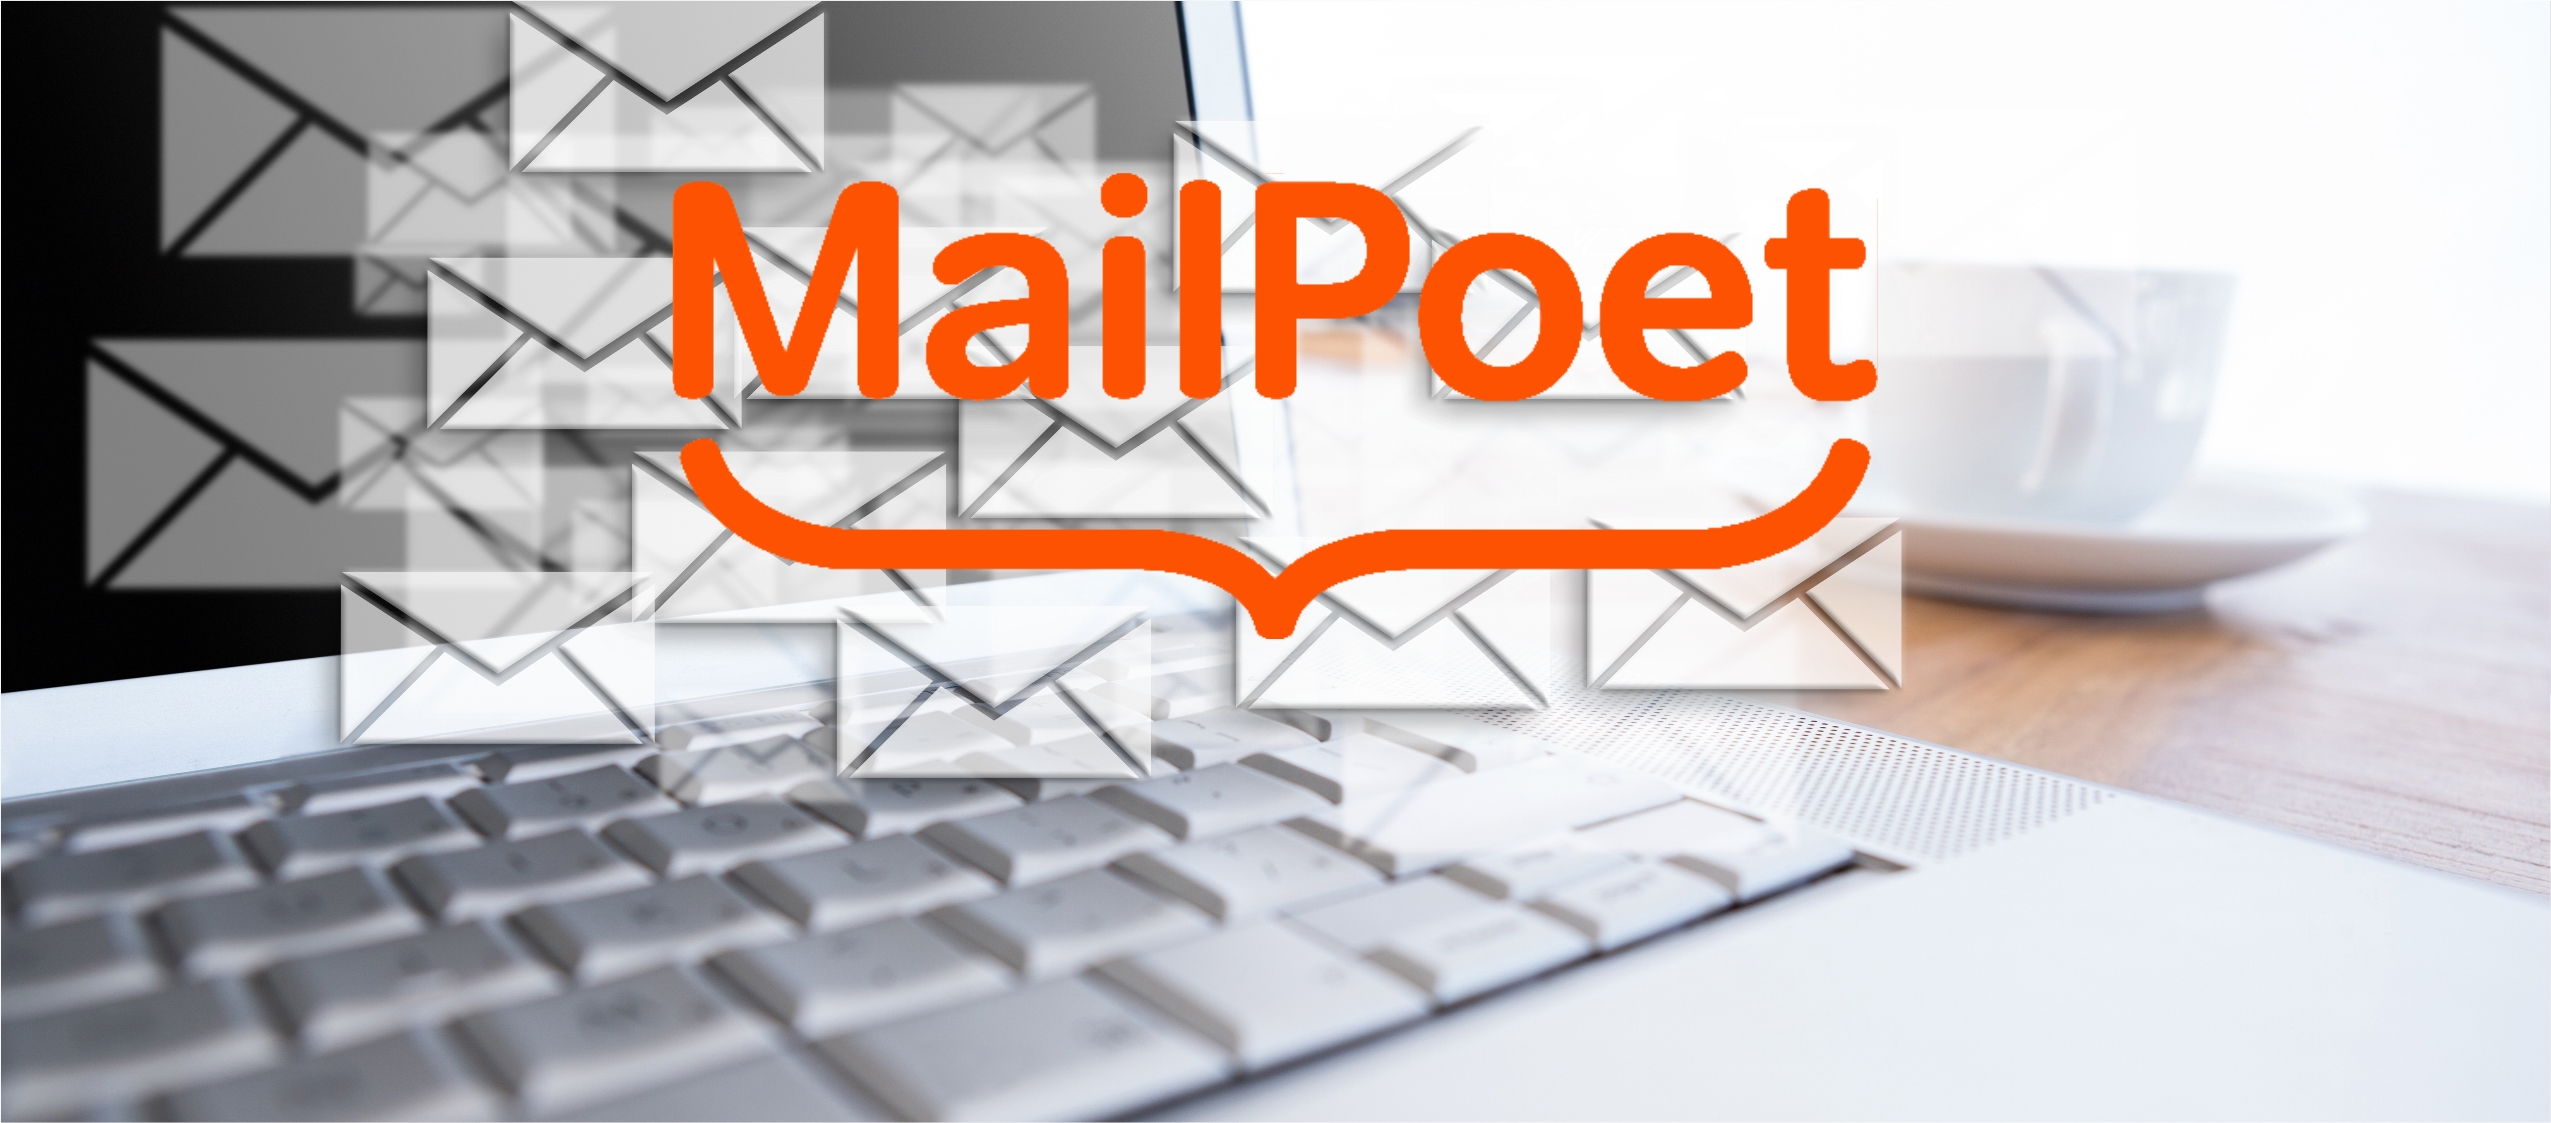 Mail Poet Help: A Beginner’s Guide to Email Marketing